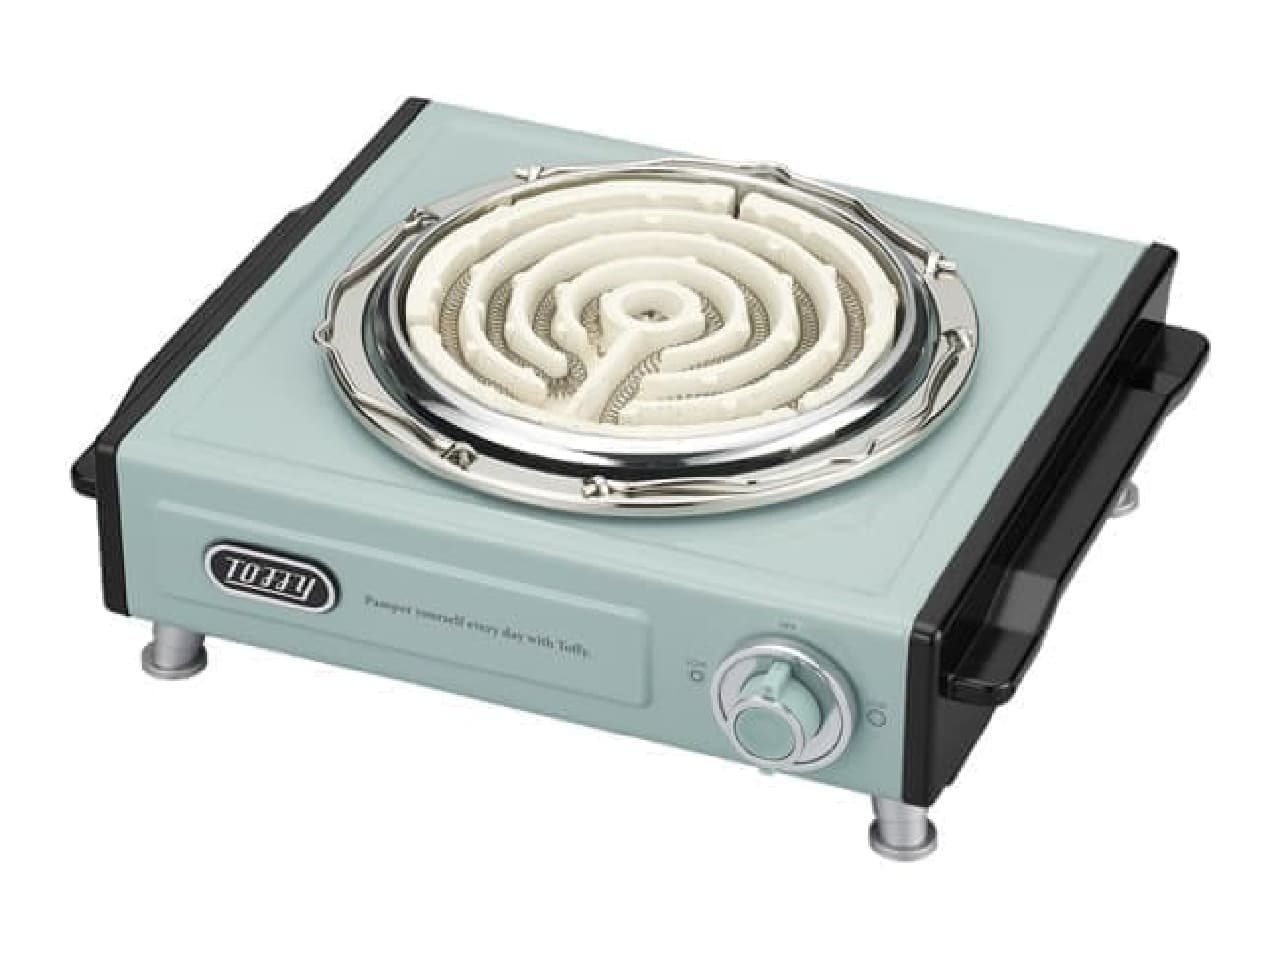 Compact "desktop electric stove" from Toffy--No gas cylinder required, no air pollution